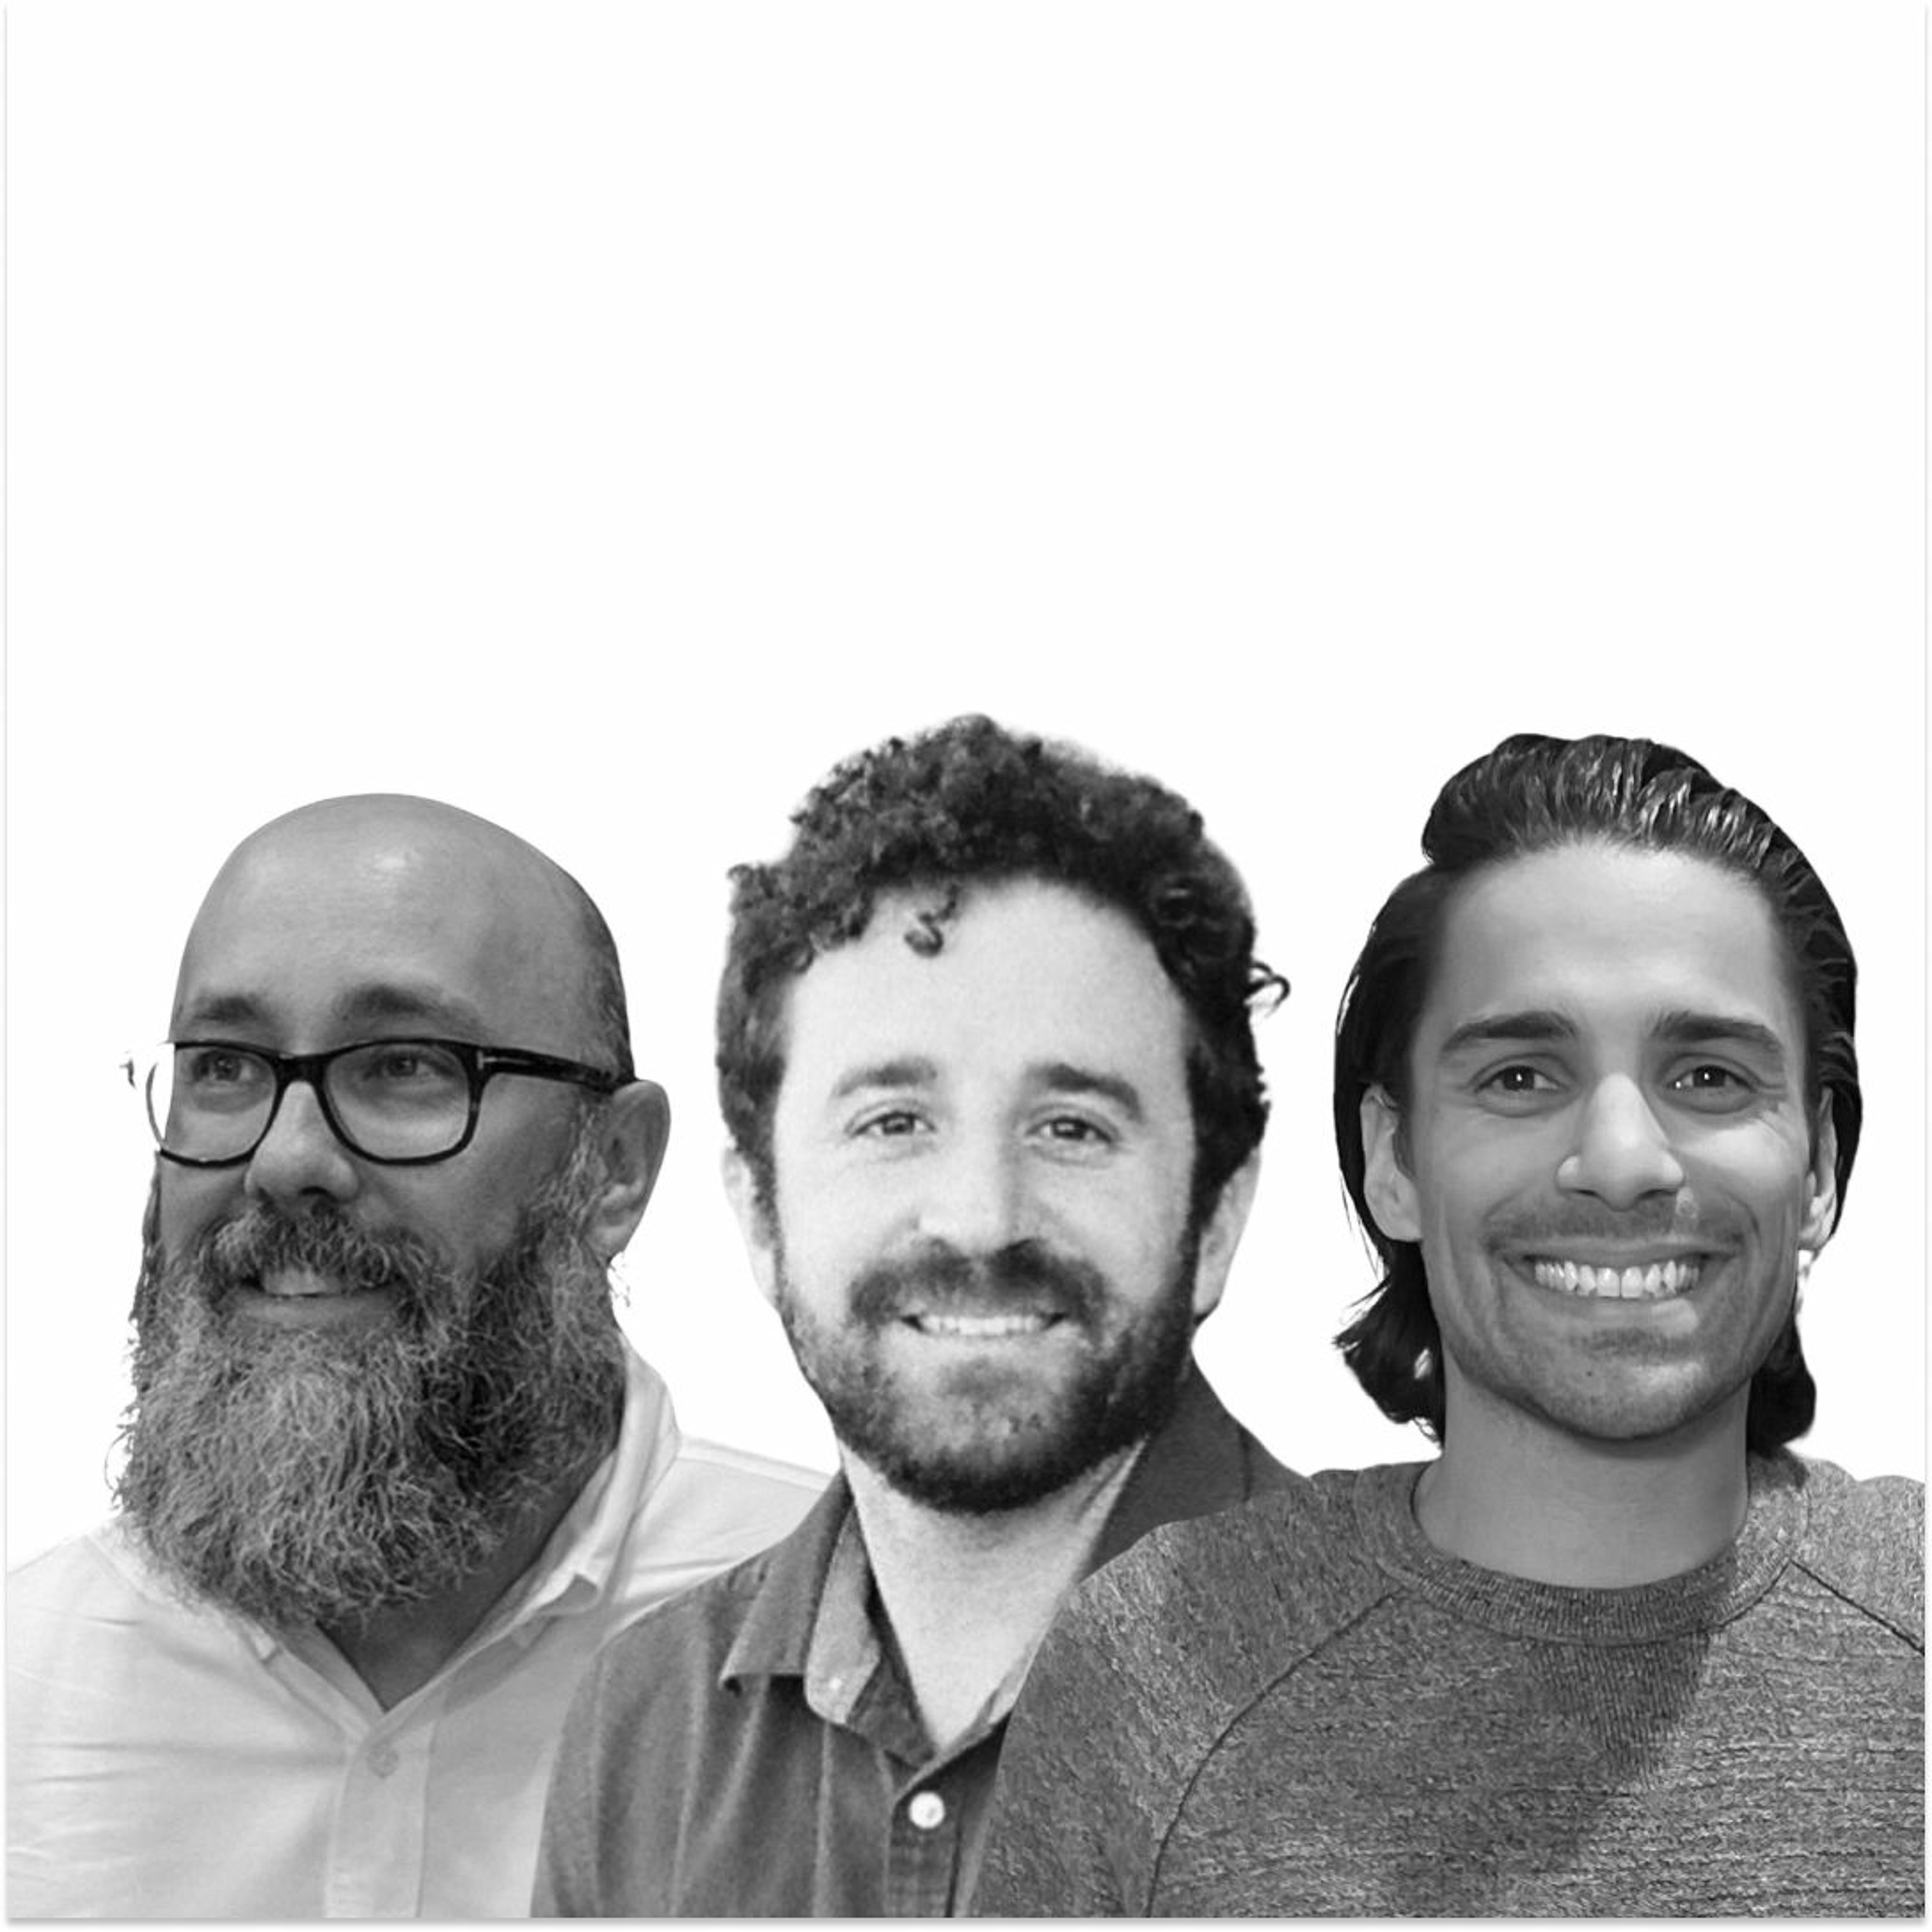 Episode 314: Numo + Created Co, a chat with Jim Martin, Jeremy Moss, and Ryan Schneider